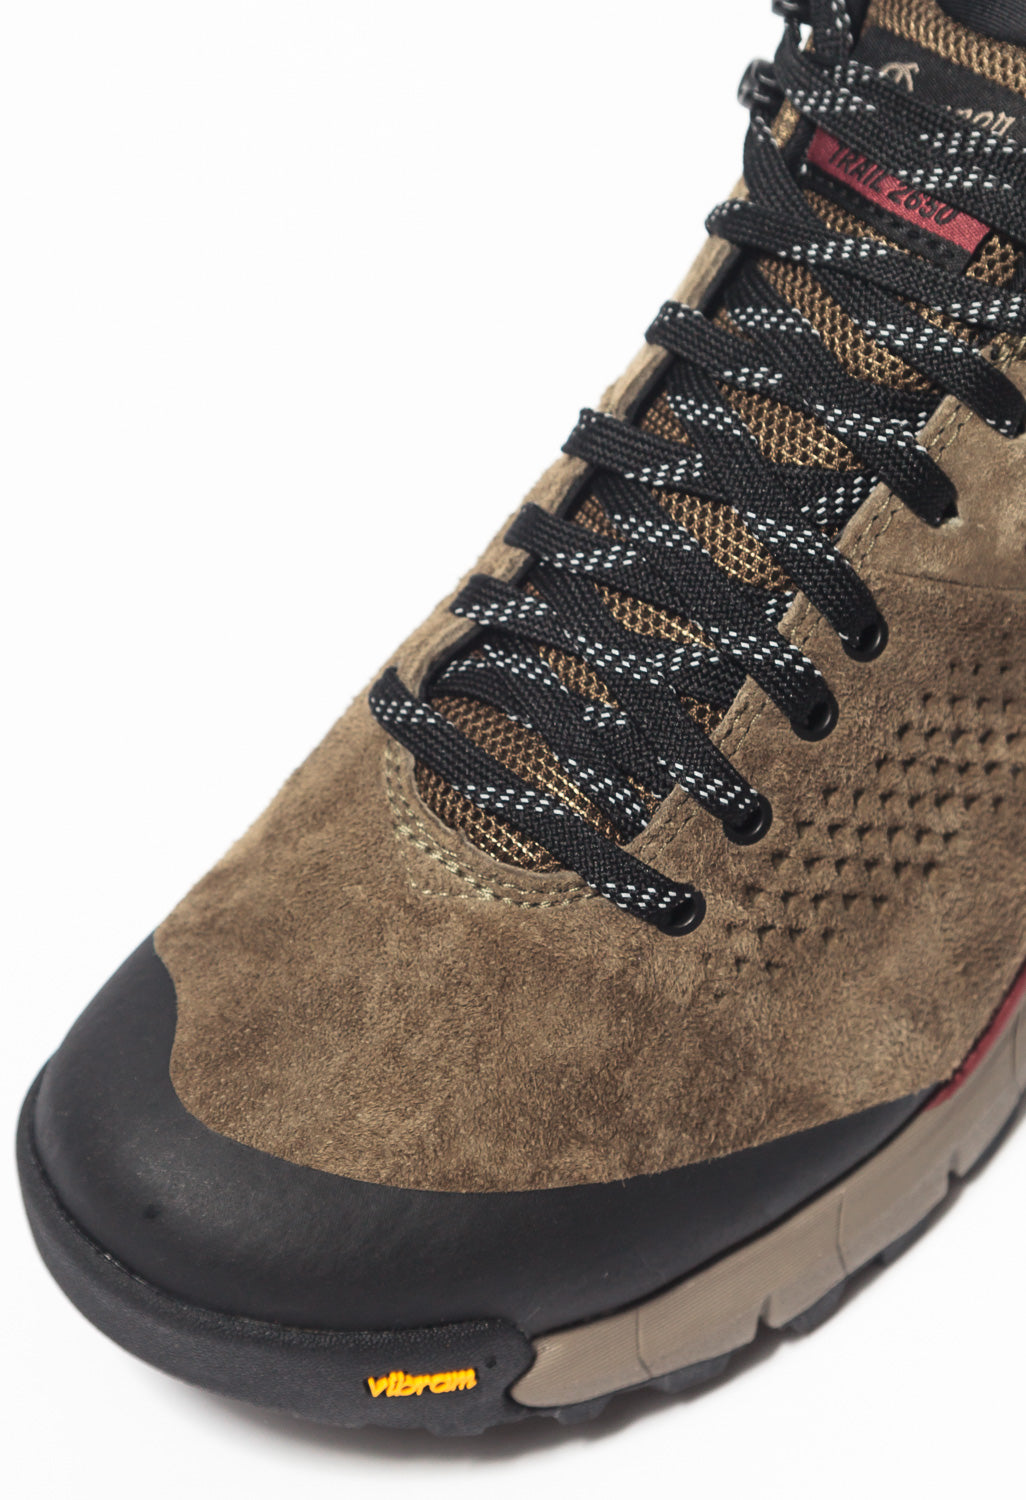 Danner Trail 2650 Mid GORE-TEX Men's Boots - Dusty Olive